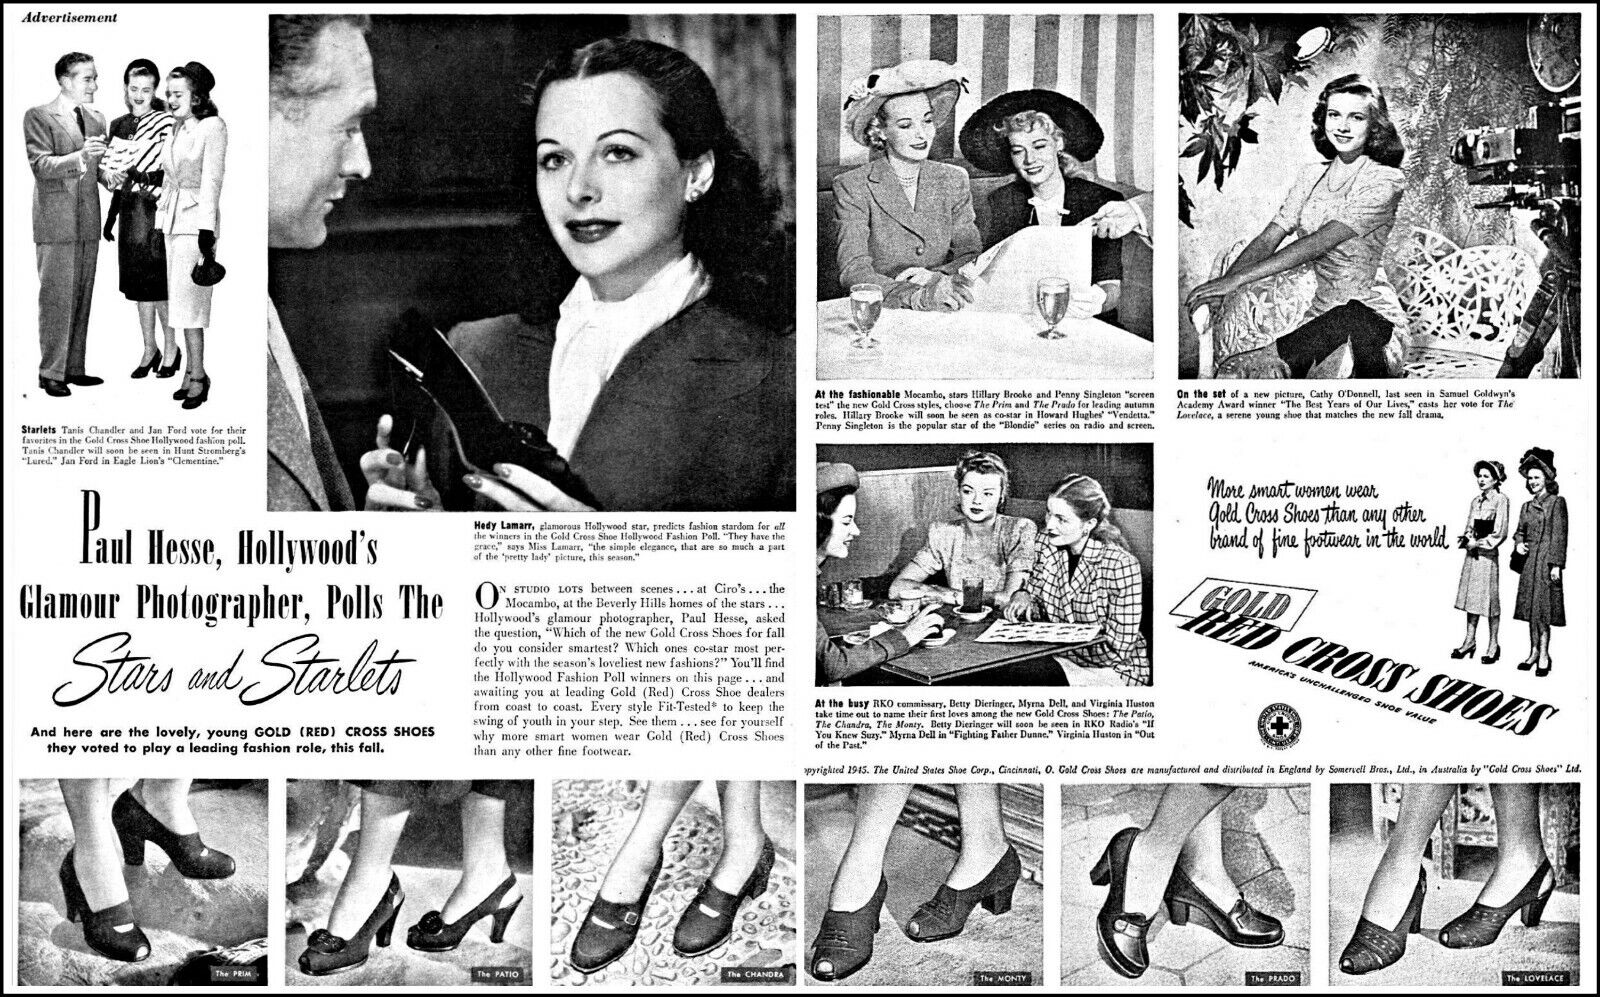 1947 Red Cross Shoes Hedy Lamarr~Myrna Dell actress photos vintage print ad adL3